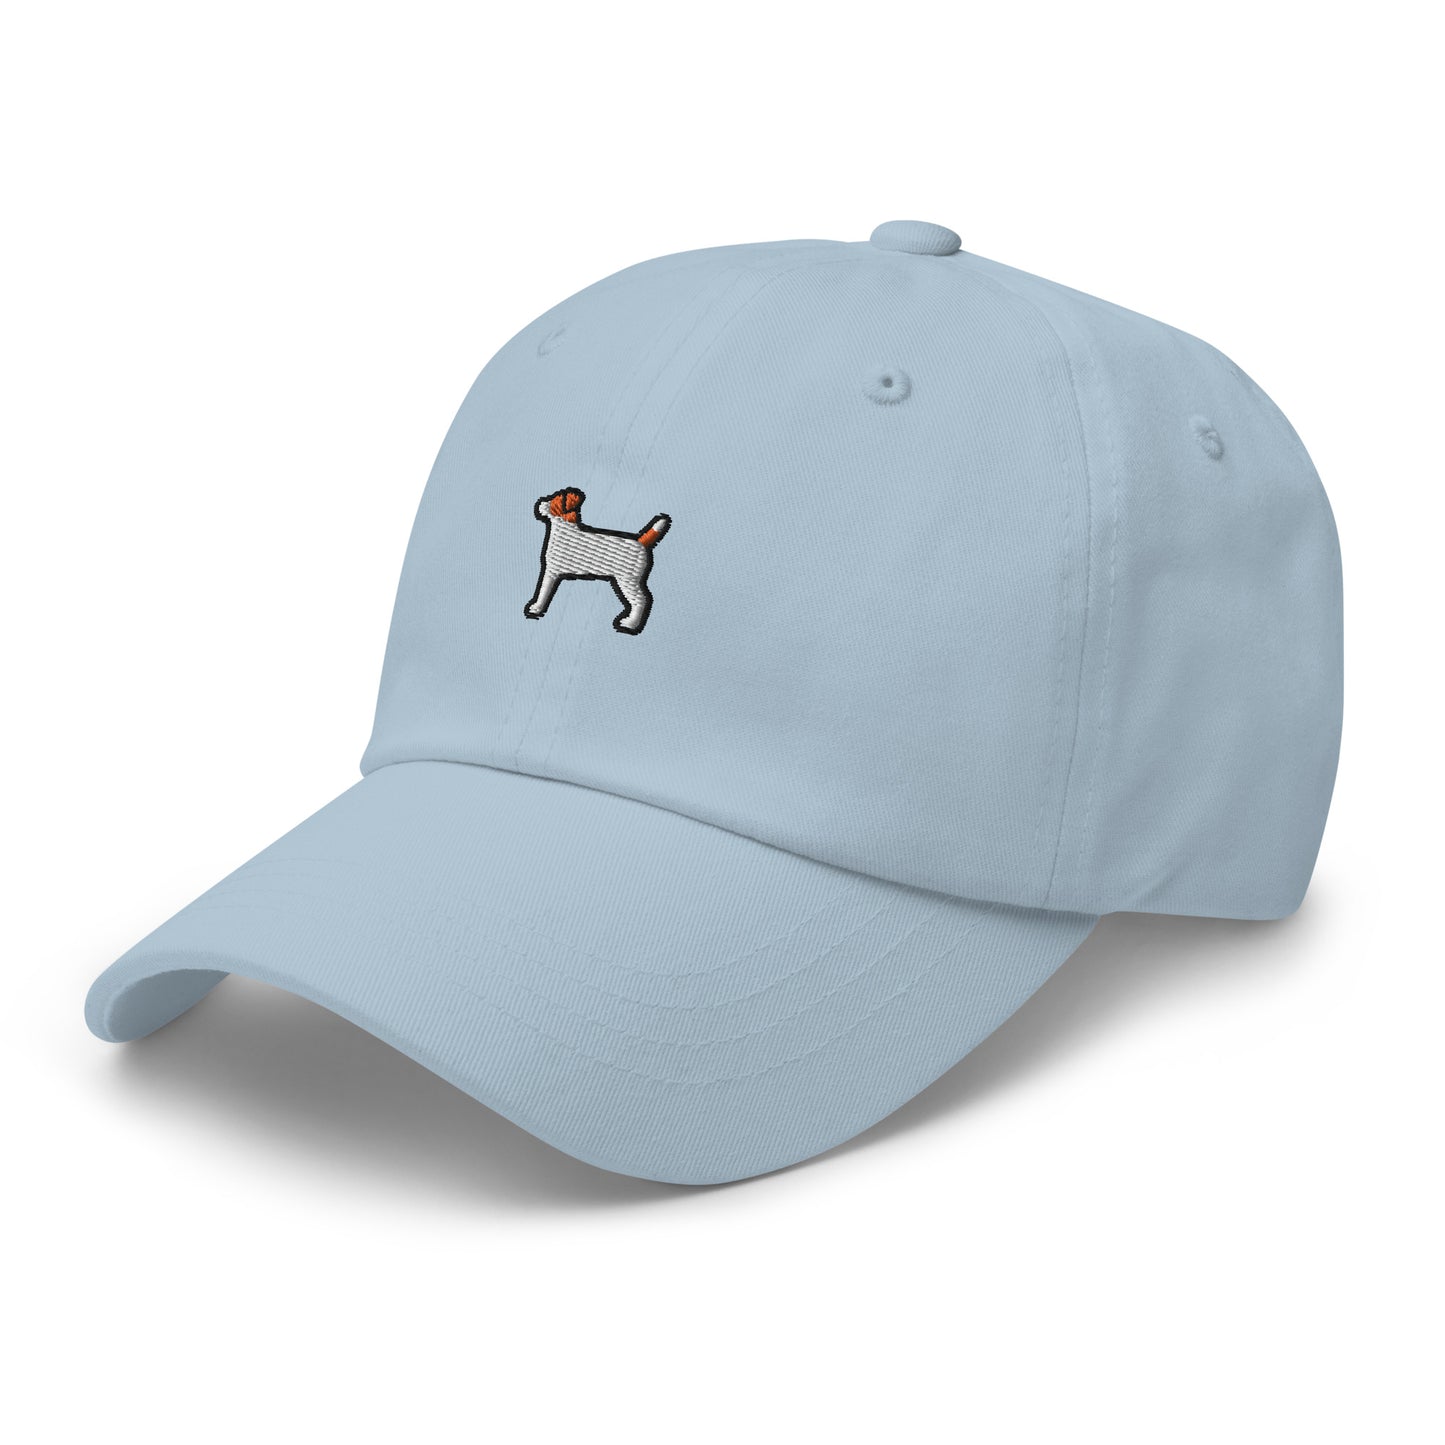 Jack Russell Terrier Dog Embroidered Baseball Cap